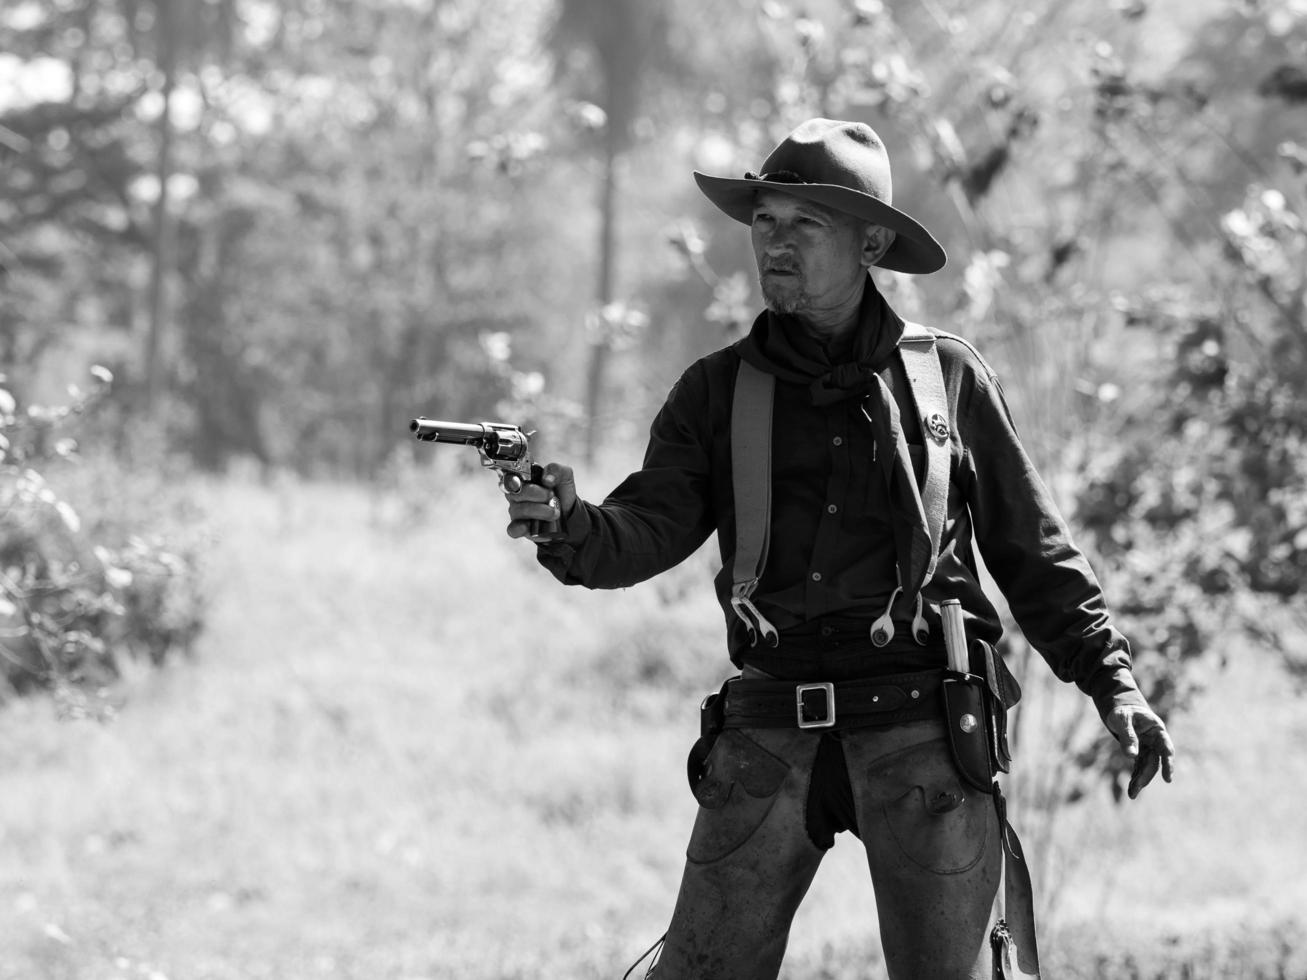 The senior cowboy stands preparing for a gunfight against opponents in the outlawed western lands photo